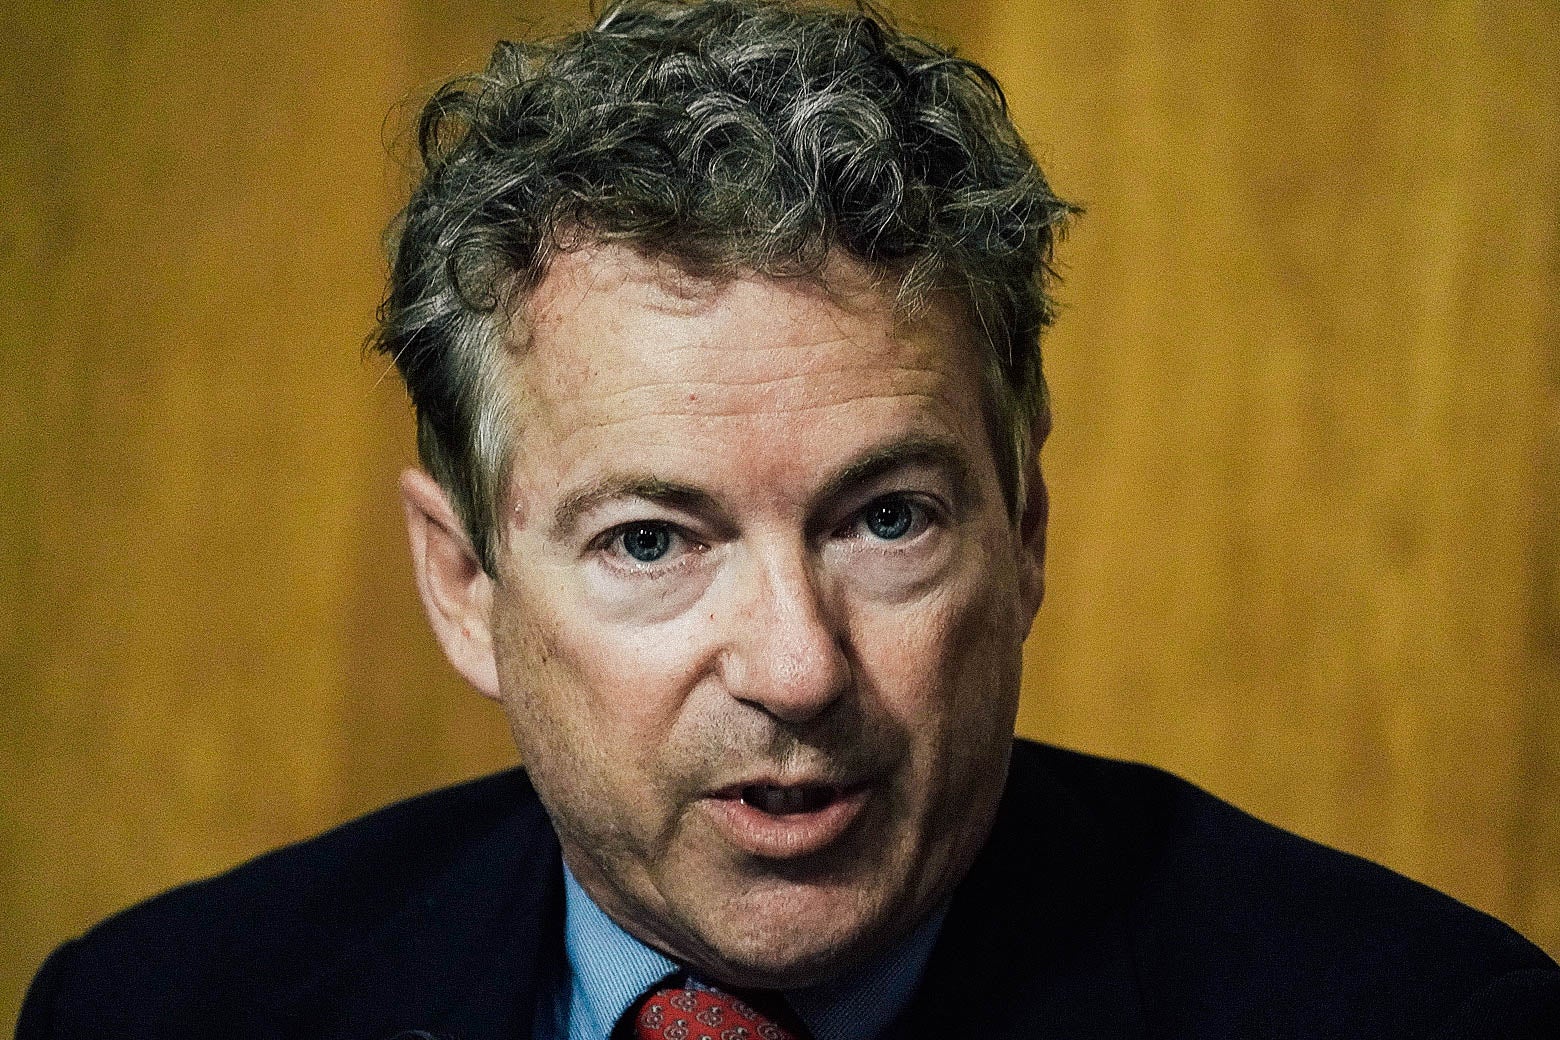 Rand Paul speaks during a Senate Foreign Relations Committee meeting on Apr. 23, 2018 in Washington, DC.